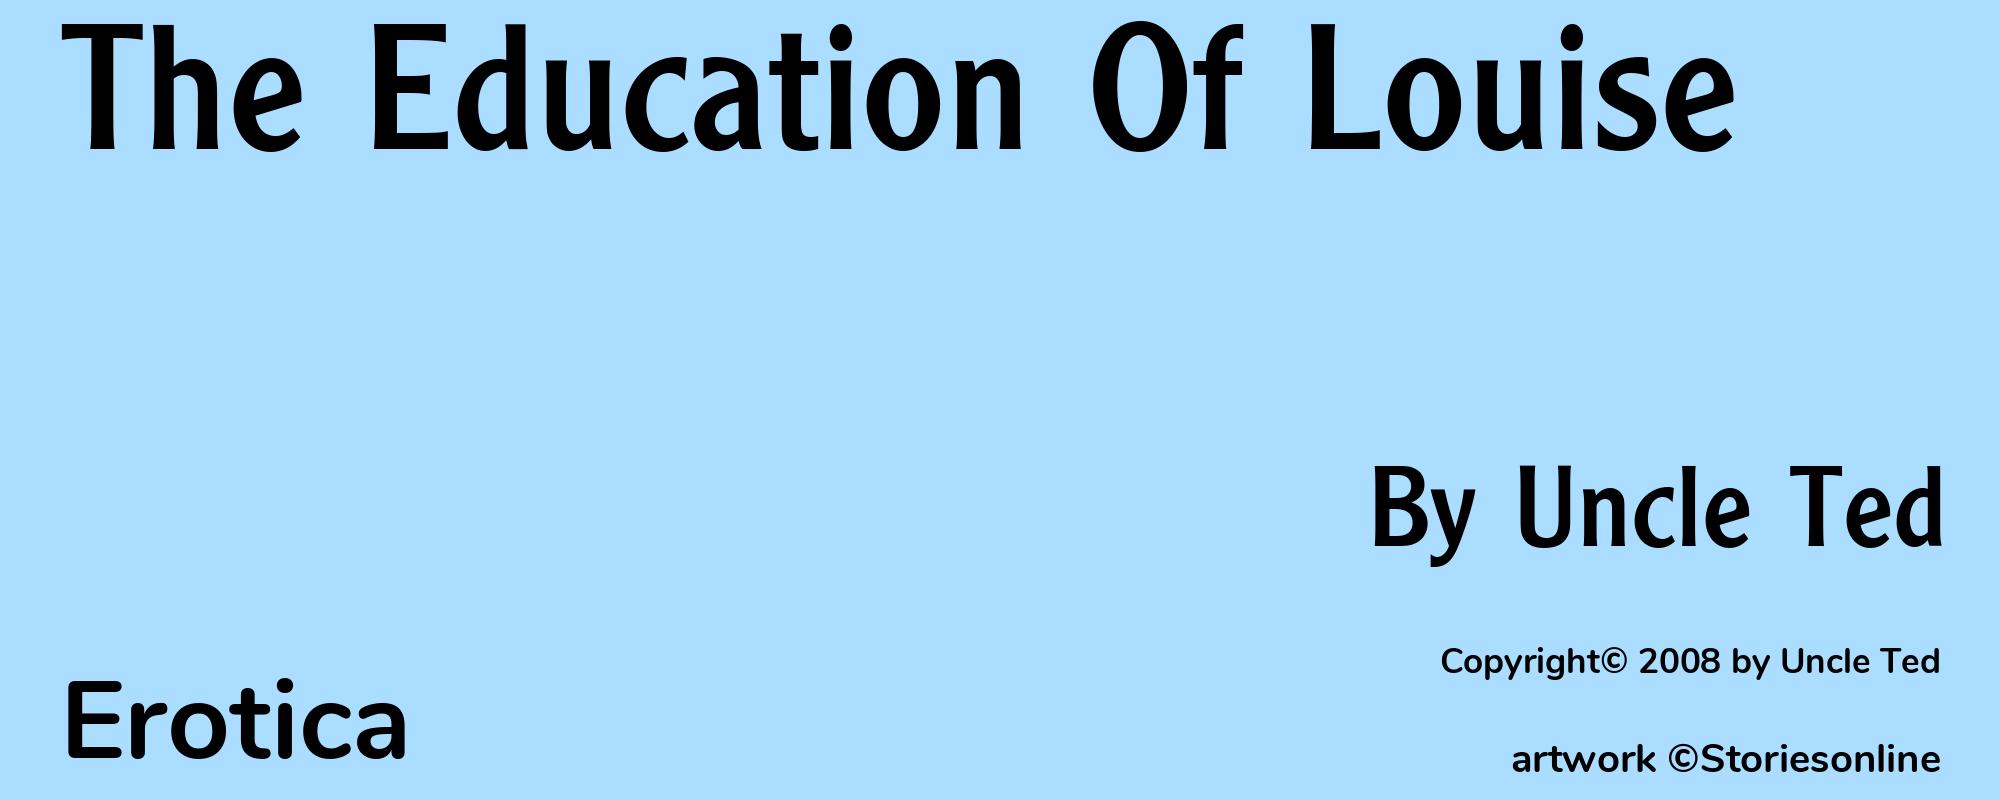 The Education Of Louise - Cover